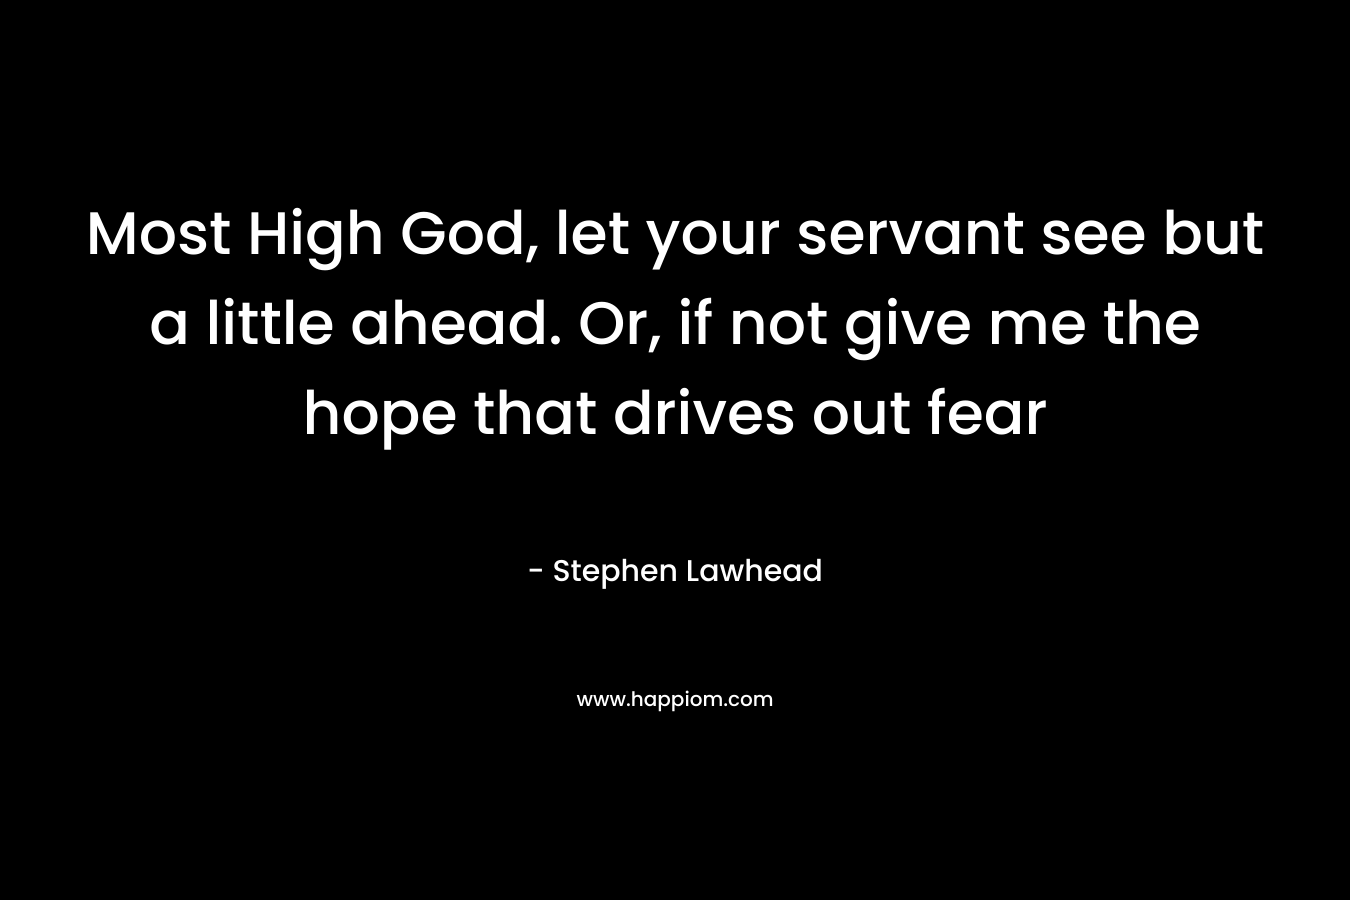 Most High God, let your servant see but a little ahead. Or, if not give me the hope that drives out fear